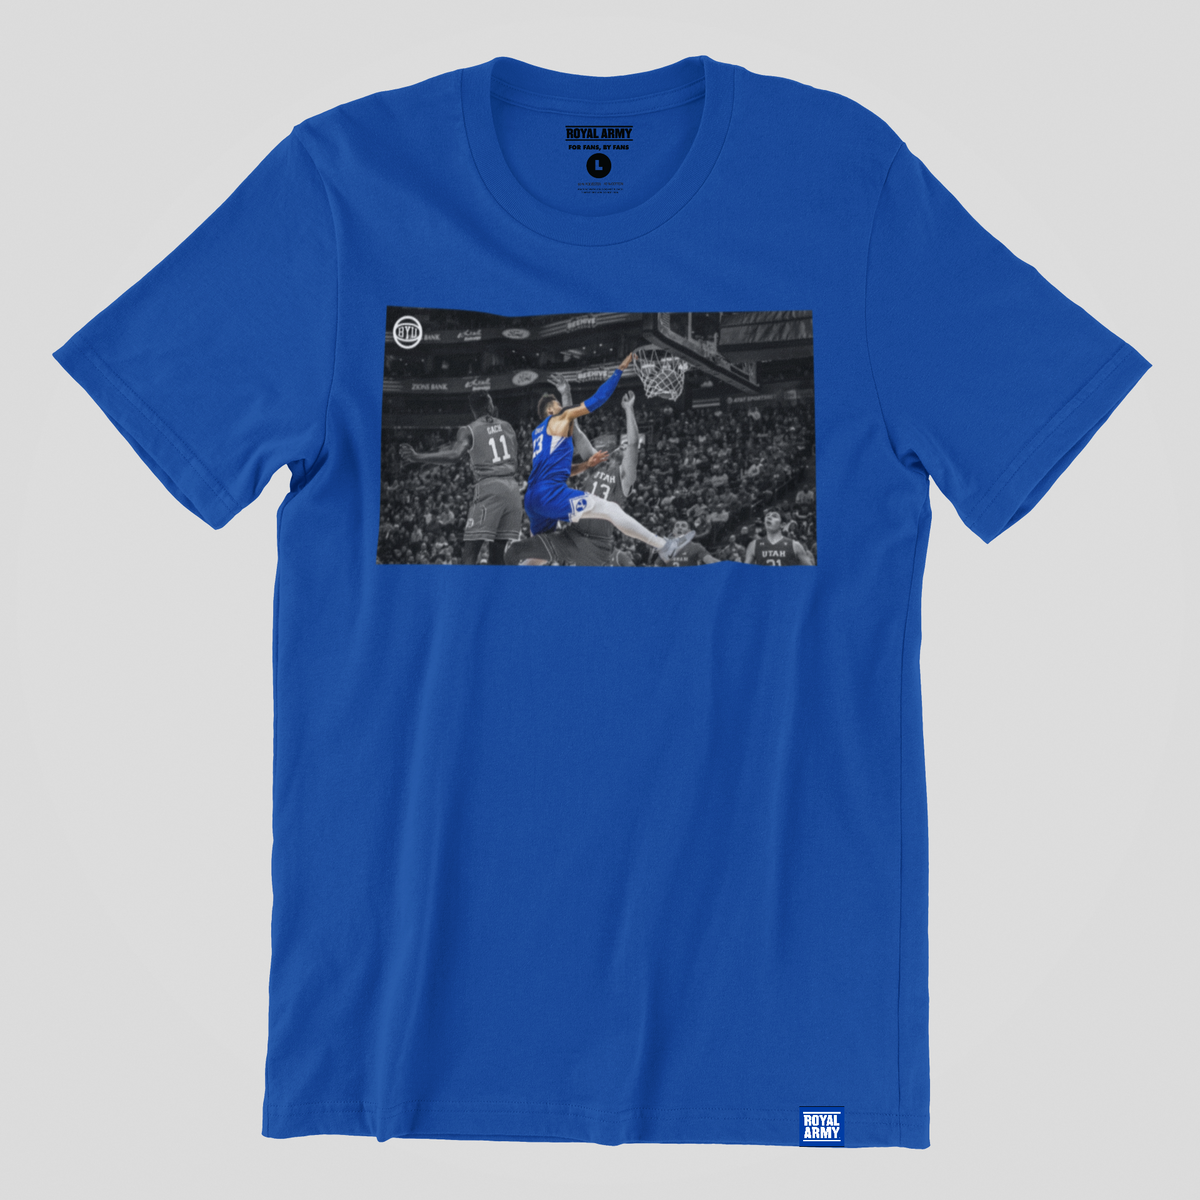 The Dunk Colorpop BYU T-shirt